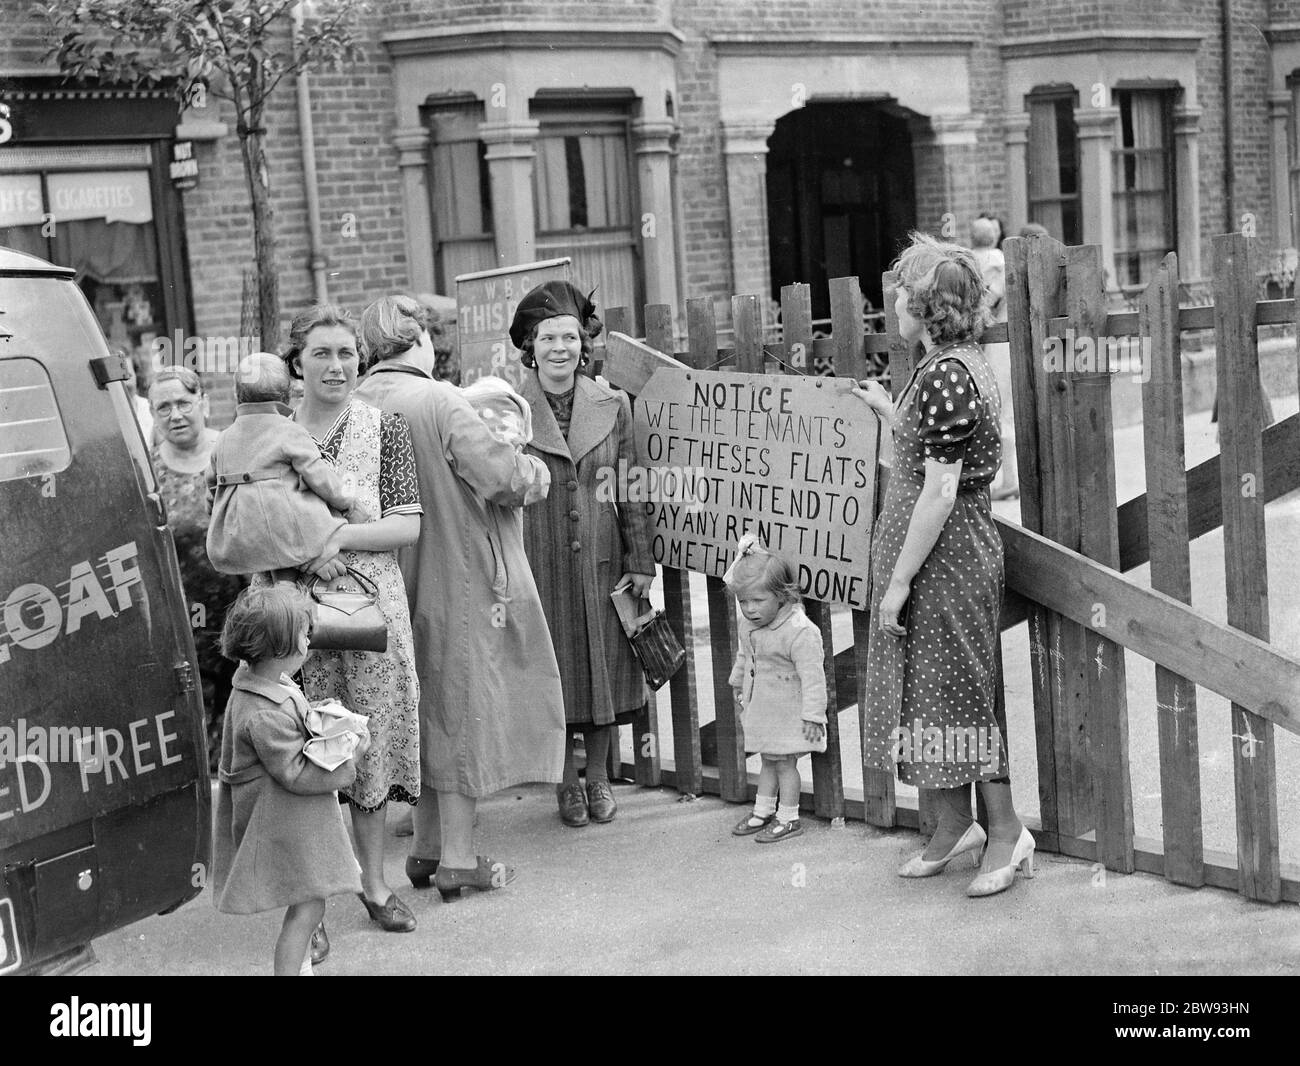 Residents of a street in Plumstead stage a small demonstration in reaction to how the authorities have dealt with the subsidence which has closed their road . They stand at the road barrier with a sign the reads : ' Notice : We the tenants of these flats do not intend to pay and rent till something is done ' . 1939 Stock Photo